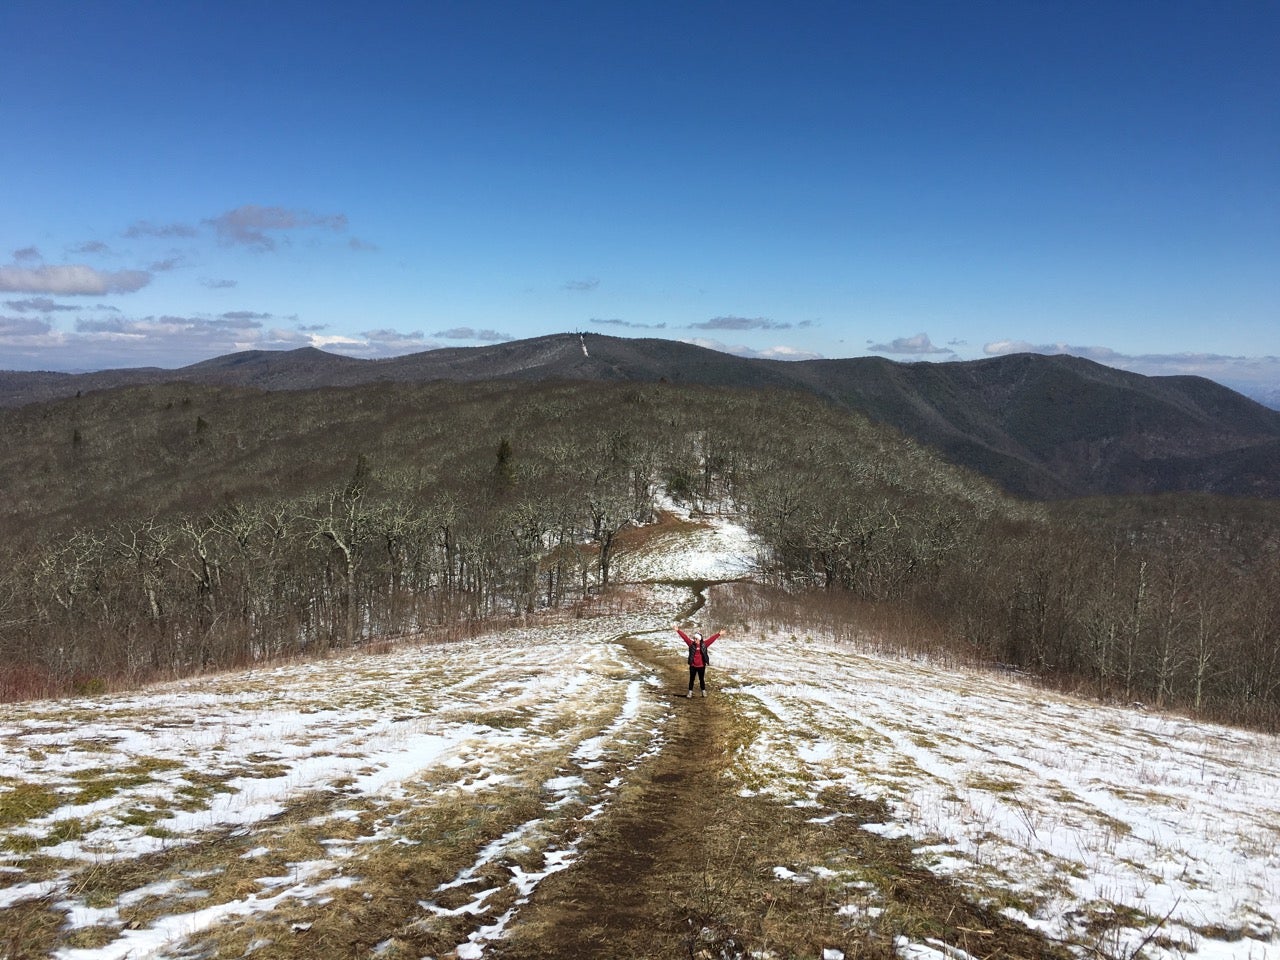 Camper submitted image from Siler Bald - 3